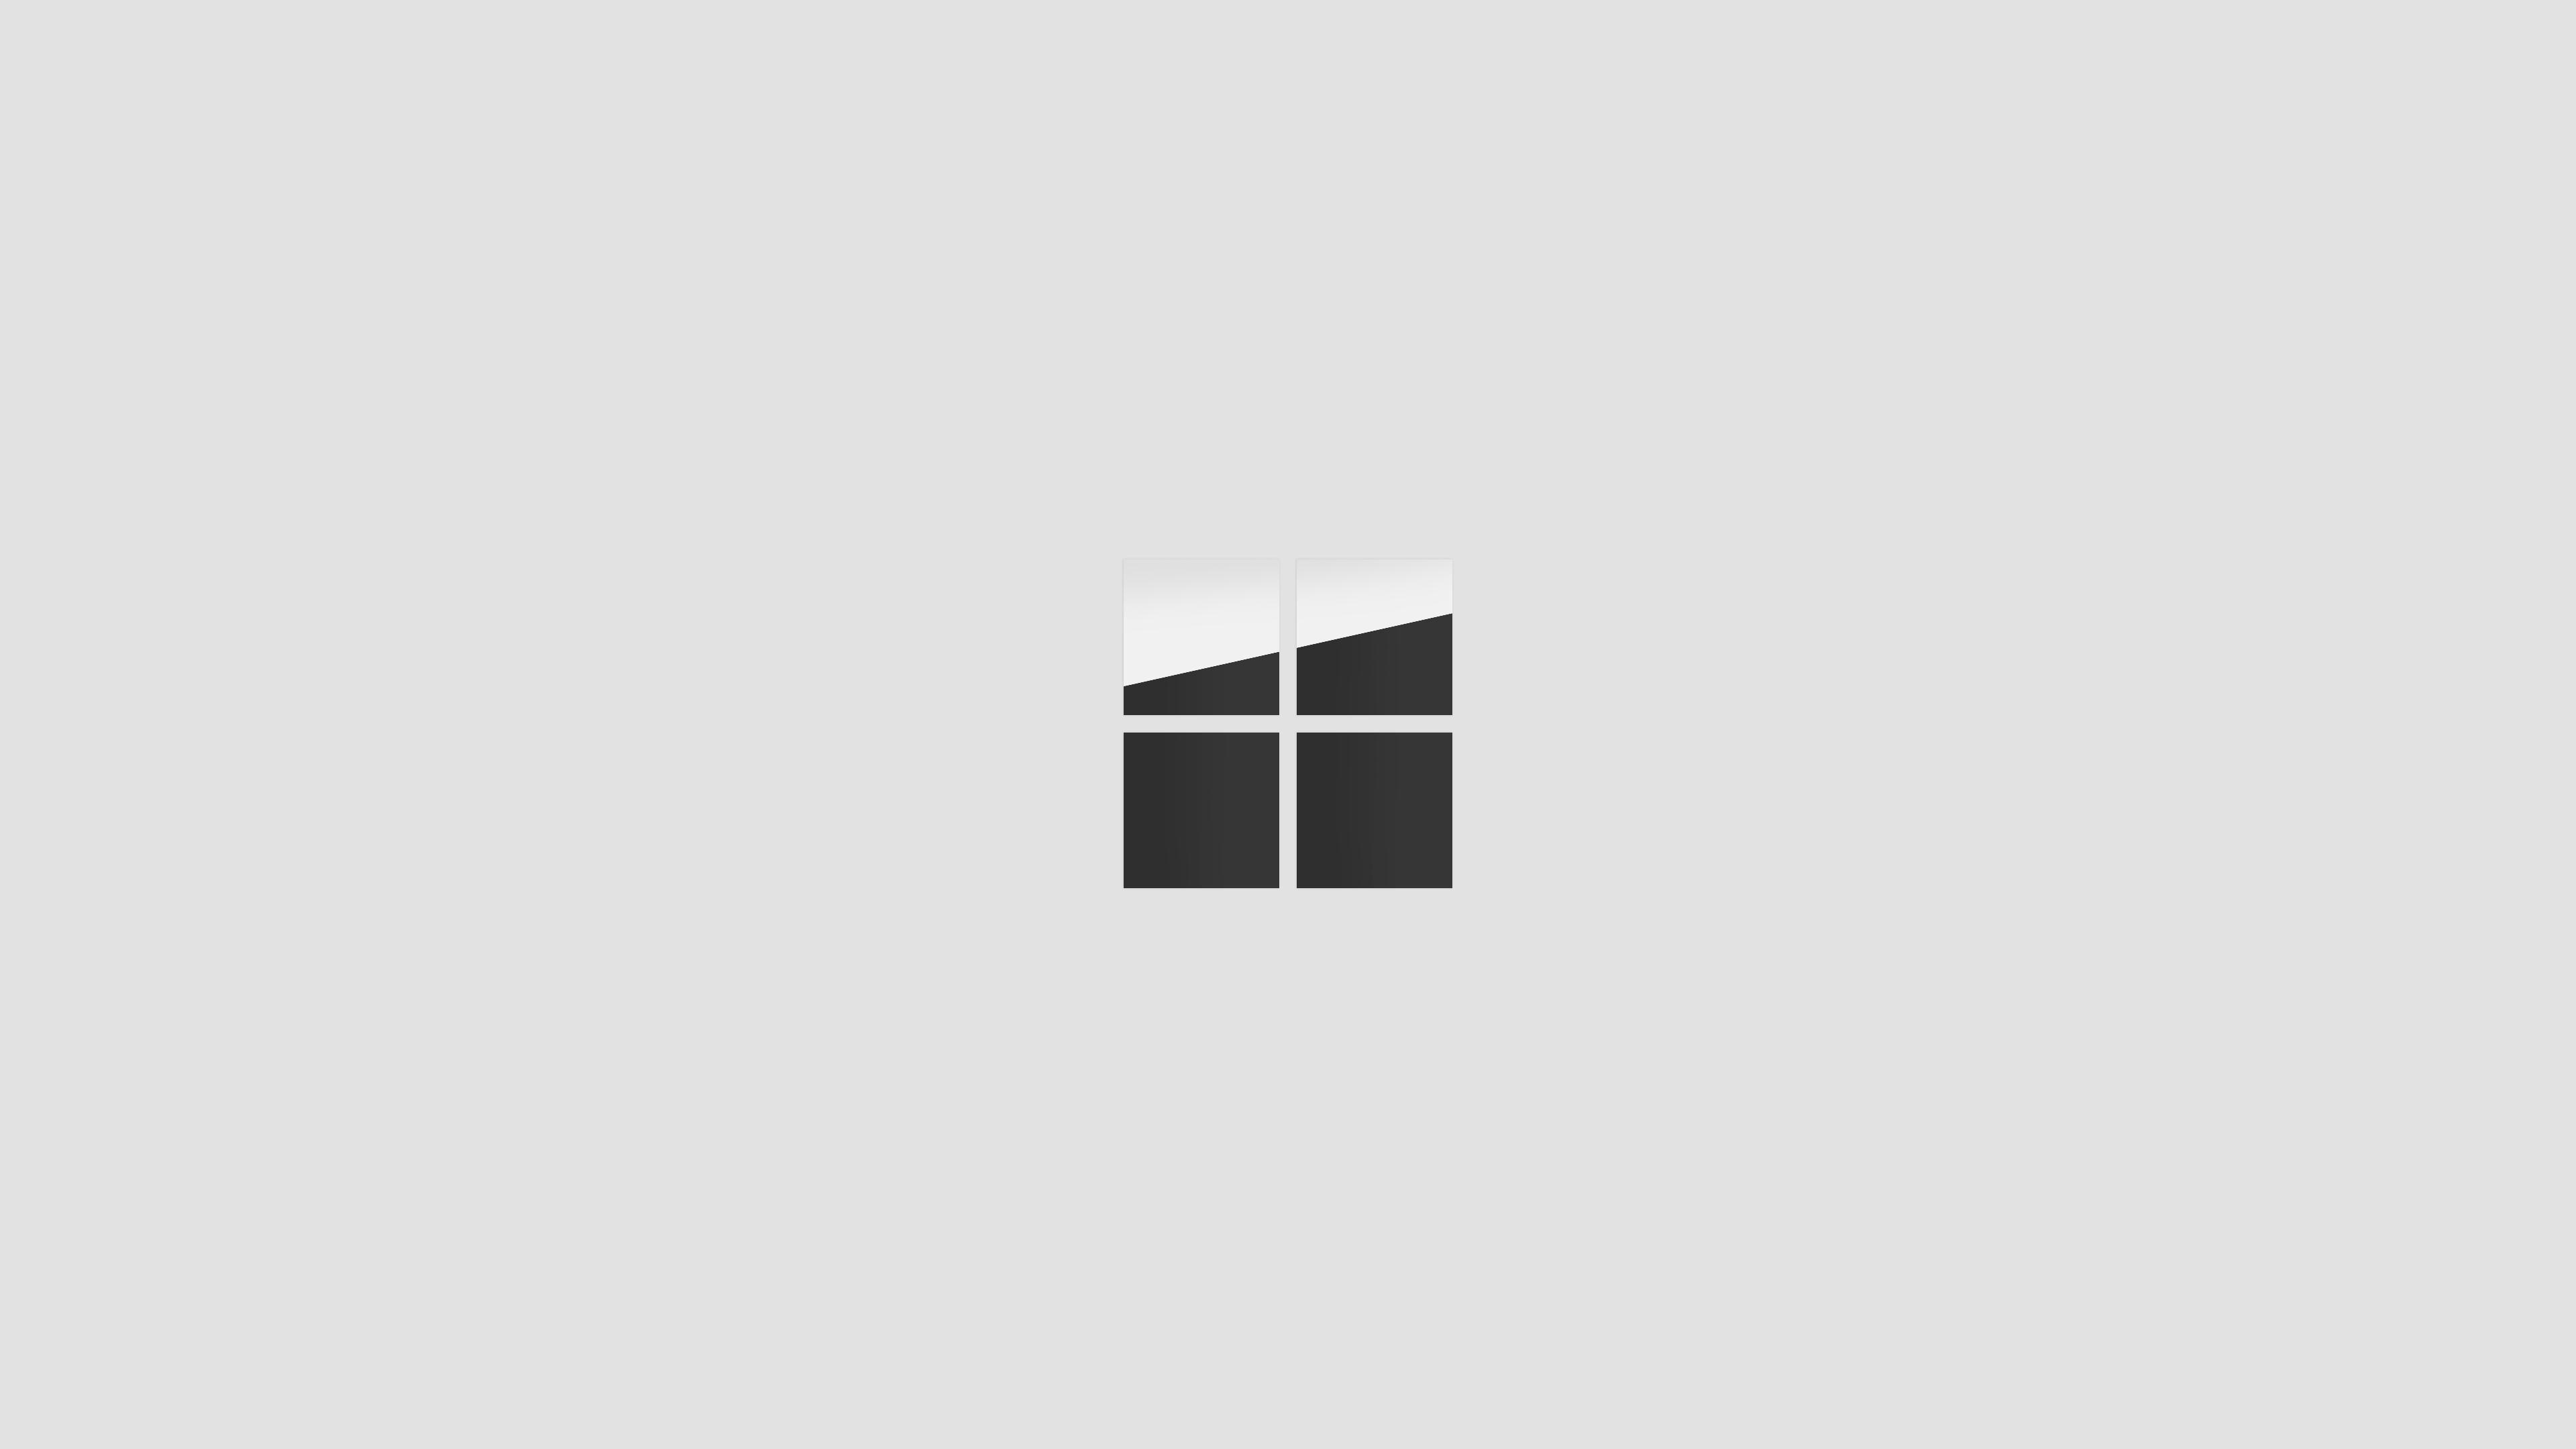 Microsoft Surface Logo - Have made a 4K adapted version of Microsoft Surface logo which is